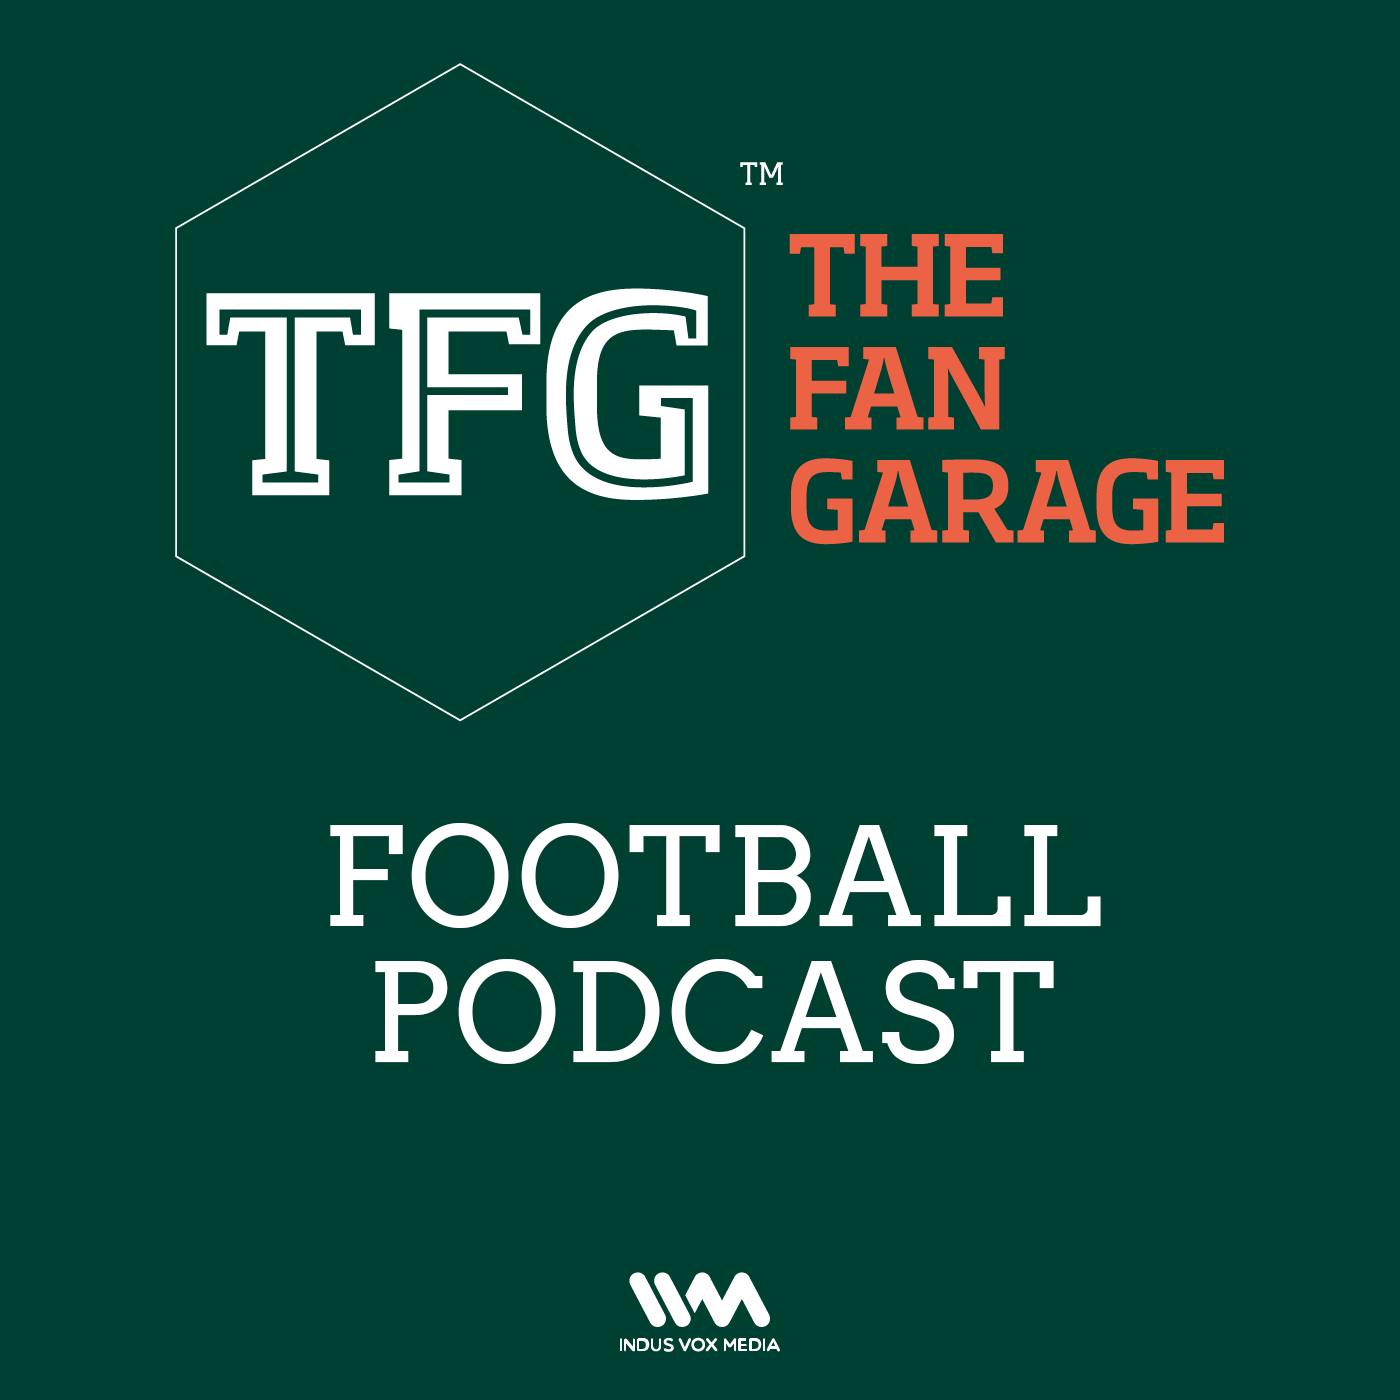 TFG Indian Football Ep.197: India at FIFA U-17 World Cup - The End or the Beginning?